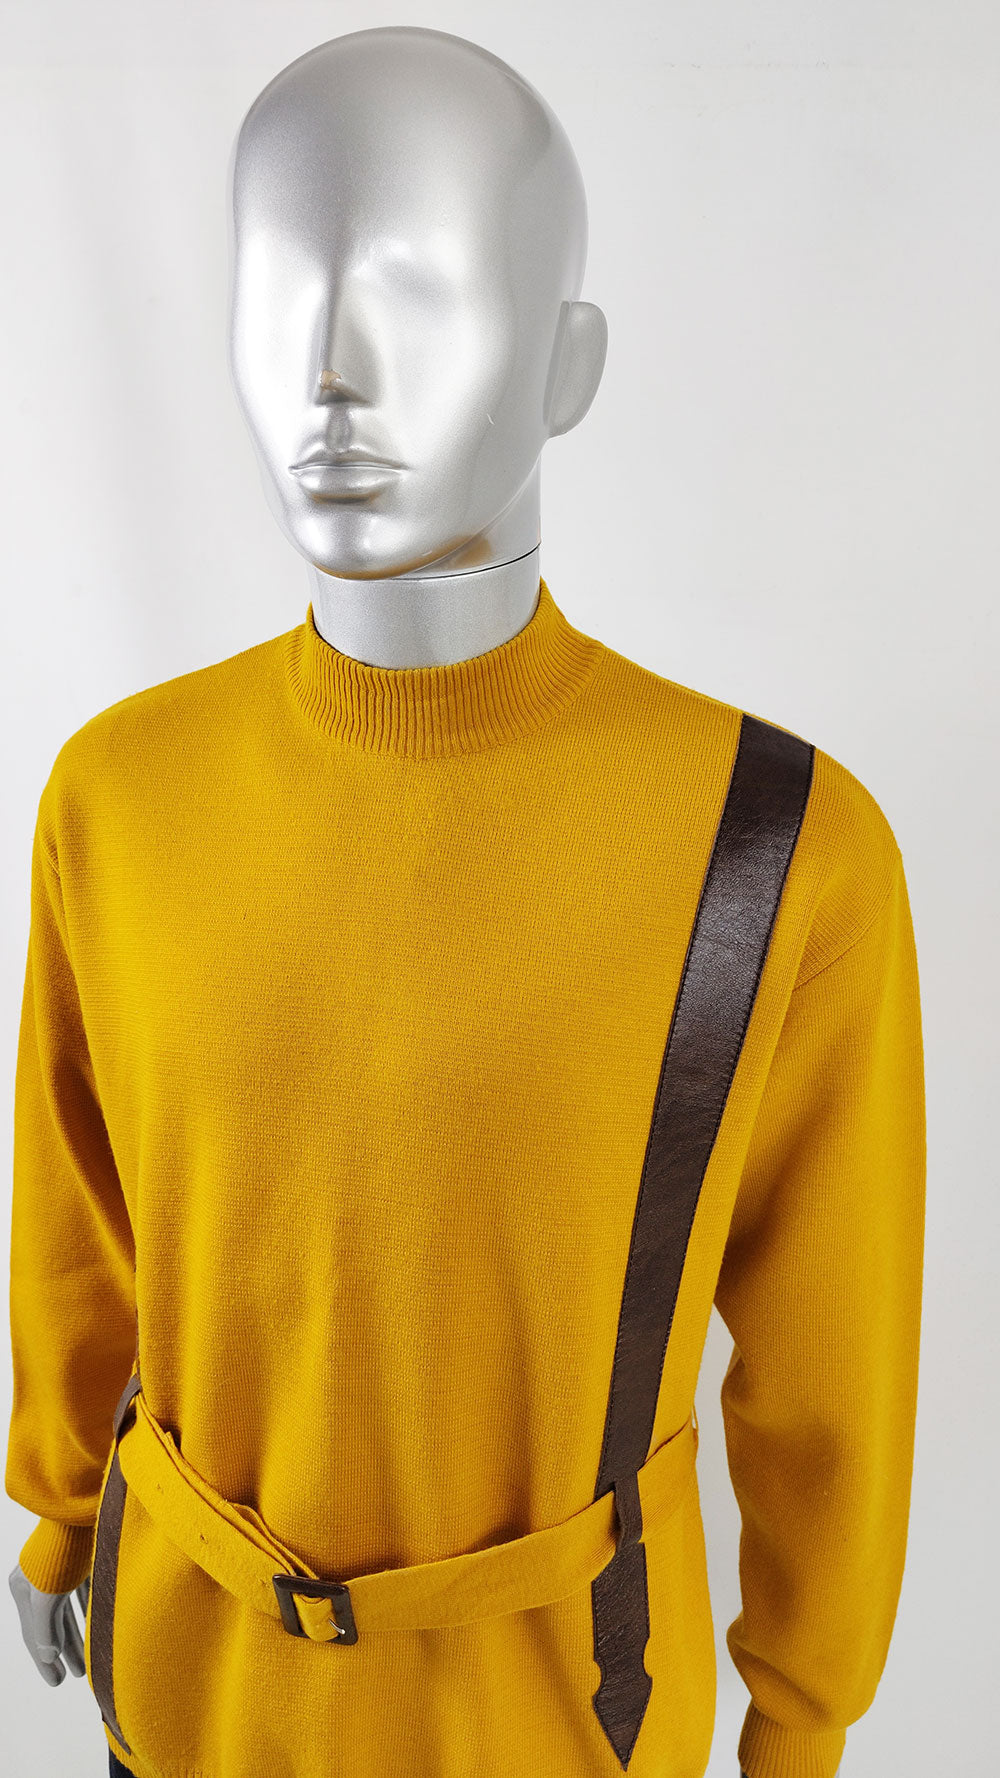 Mustard yellow wool jumper with dark brown plastic appliques and belt. A must-have for any fashion-forward collector.